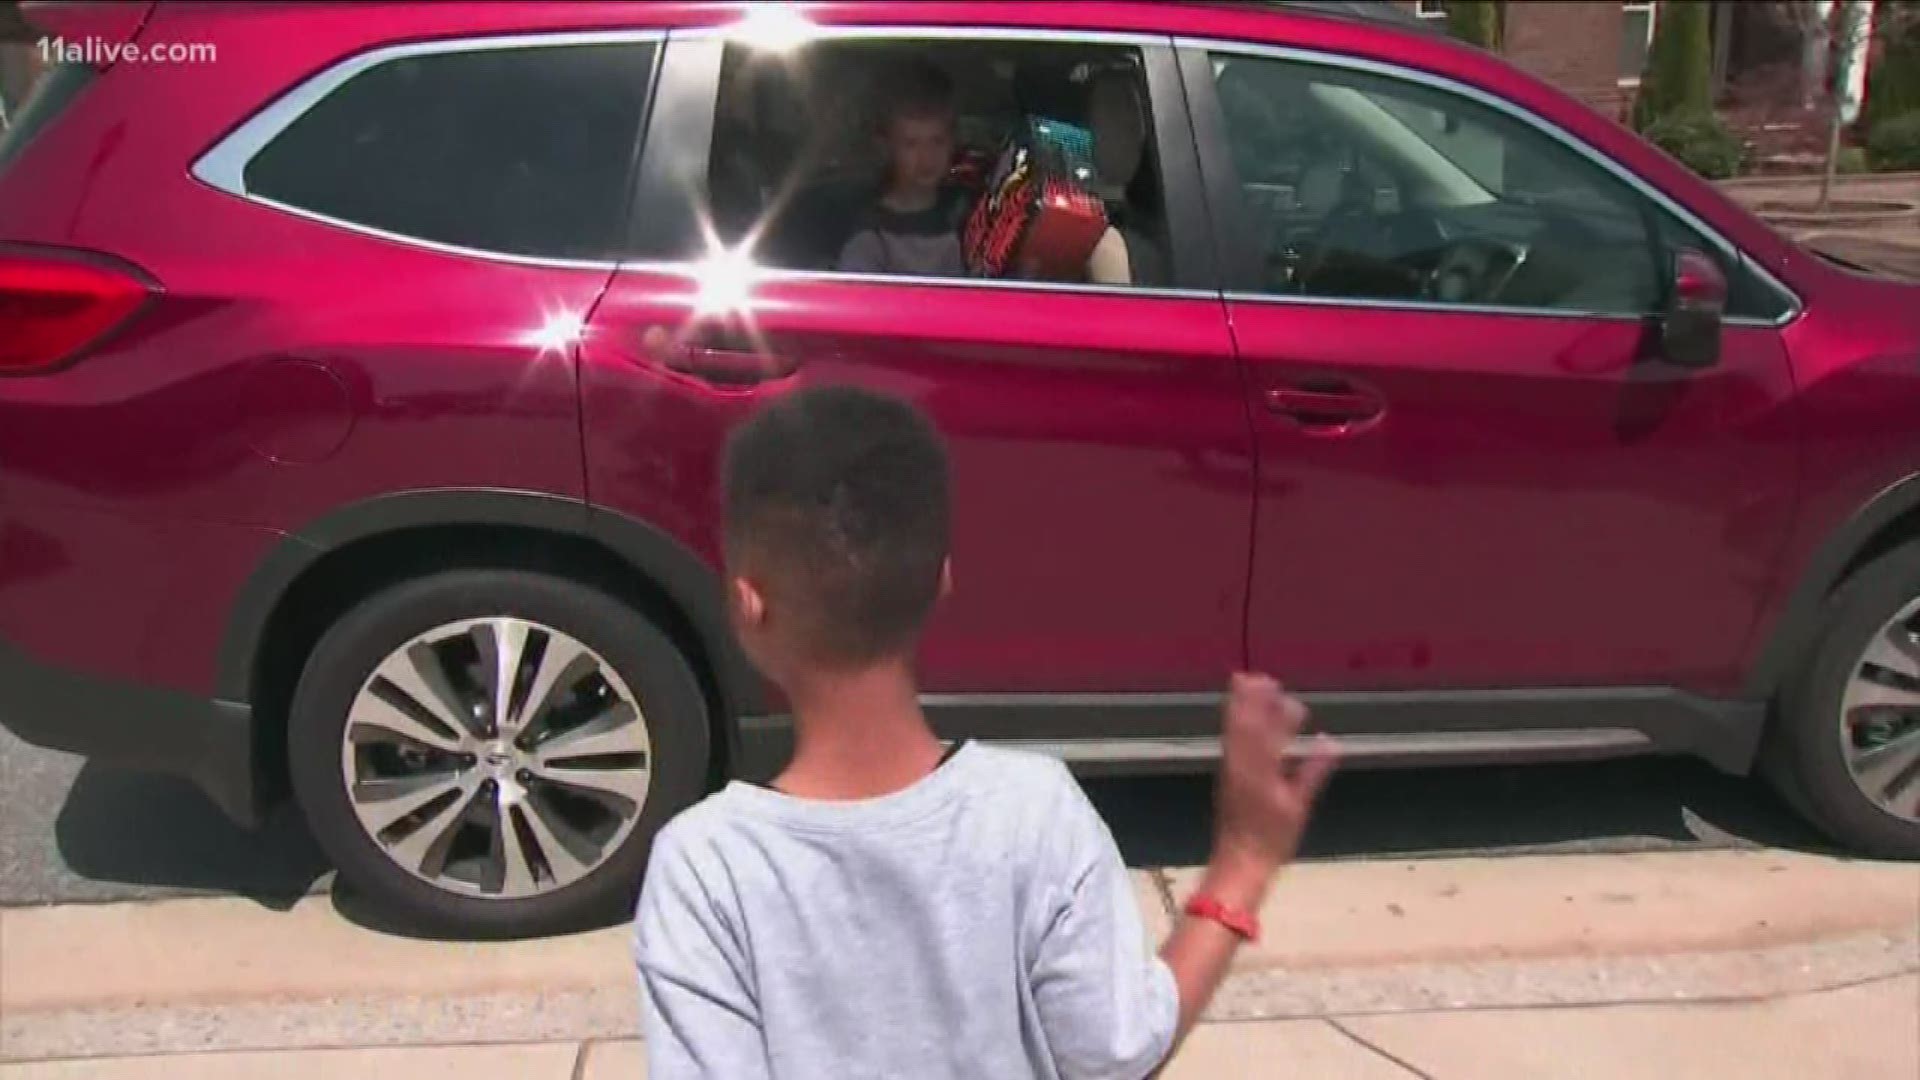 The six-year-old boy is battling an autoimmune deficiency so the couple asked friends and family to drive by and show their love.